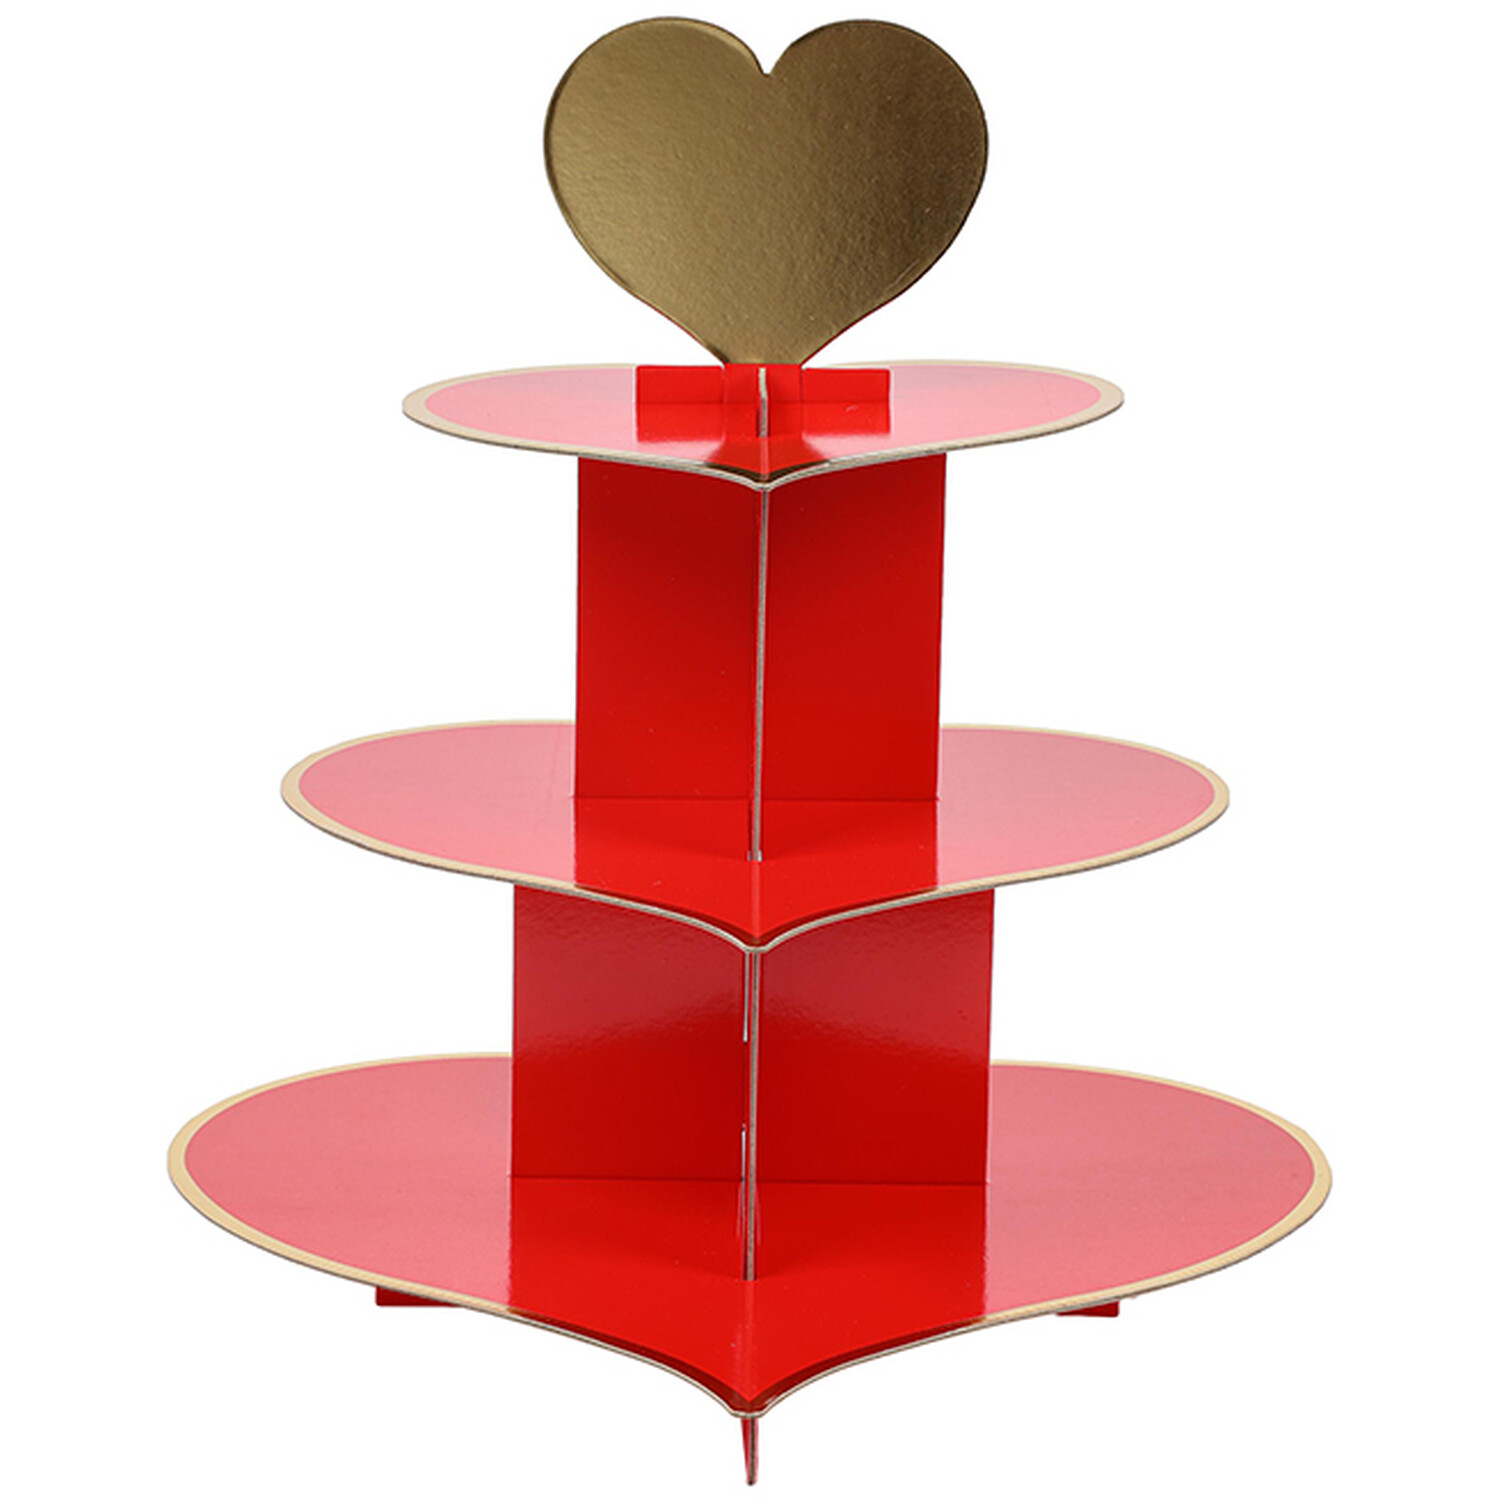 Heart 3 Tier Cake Stand - Red Image 1